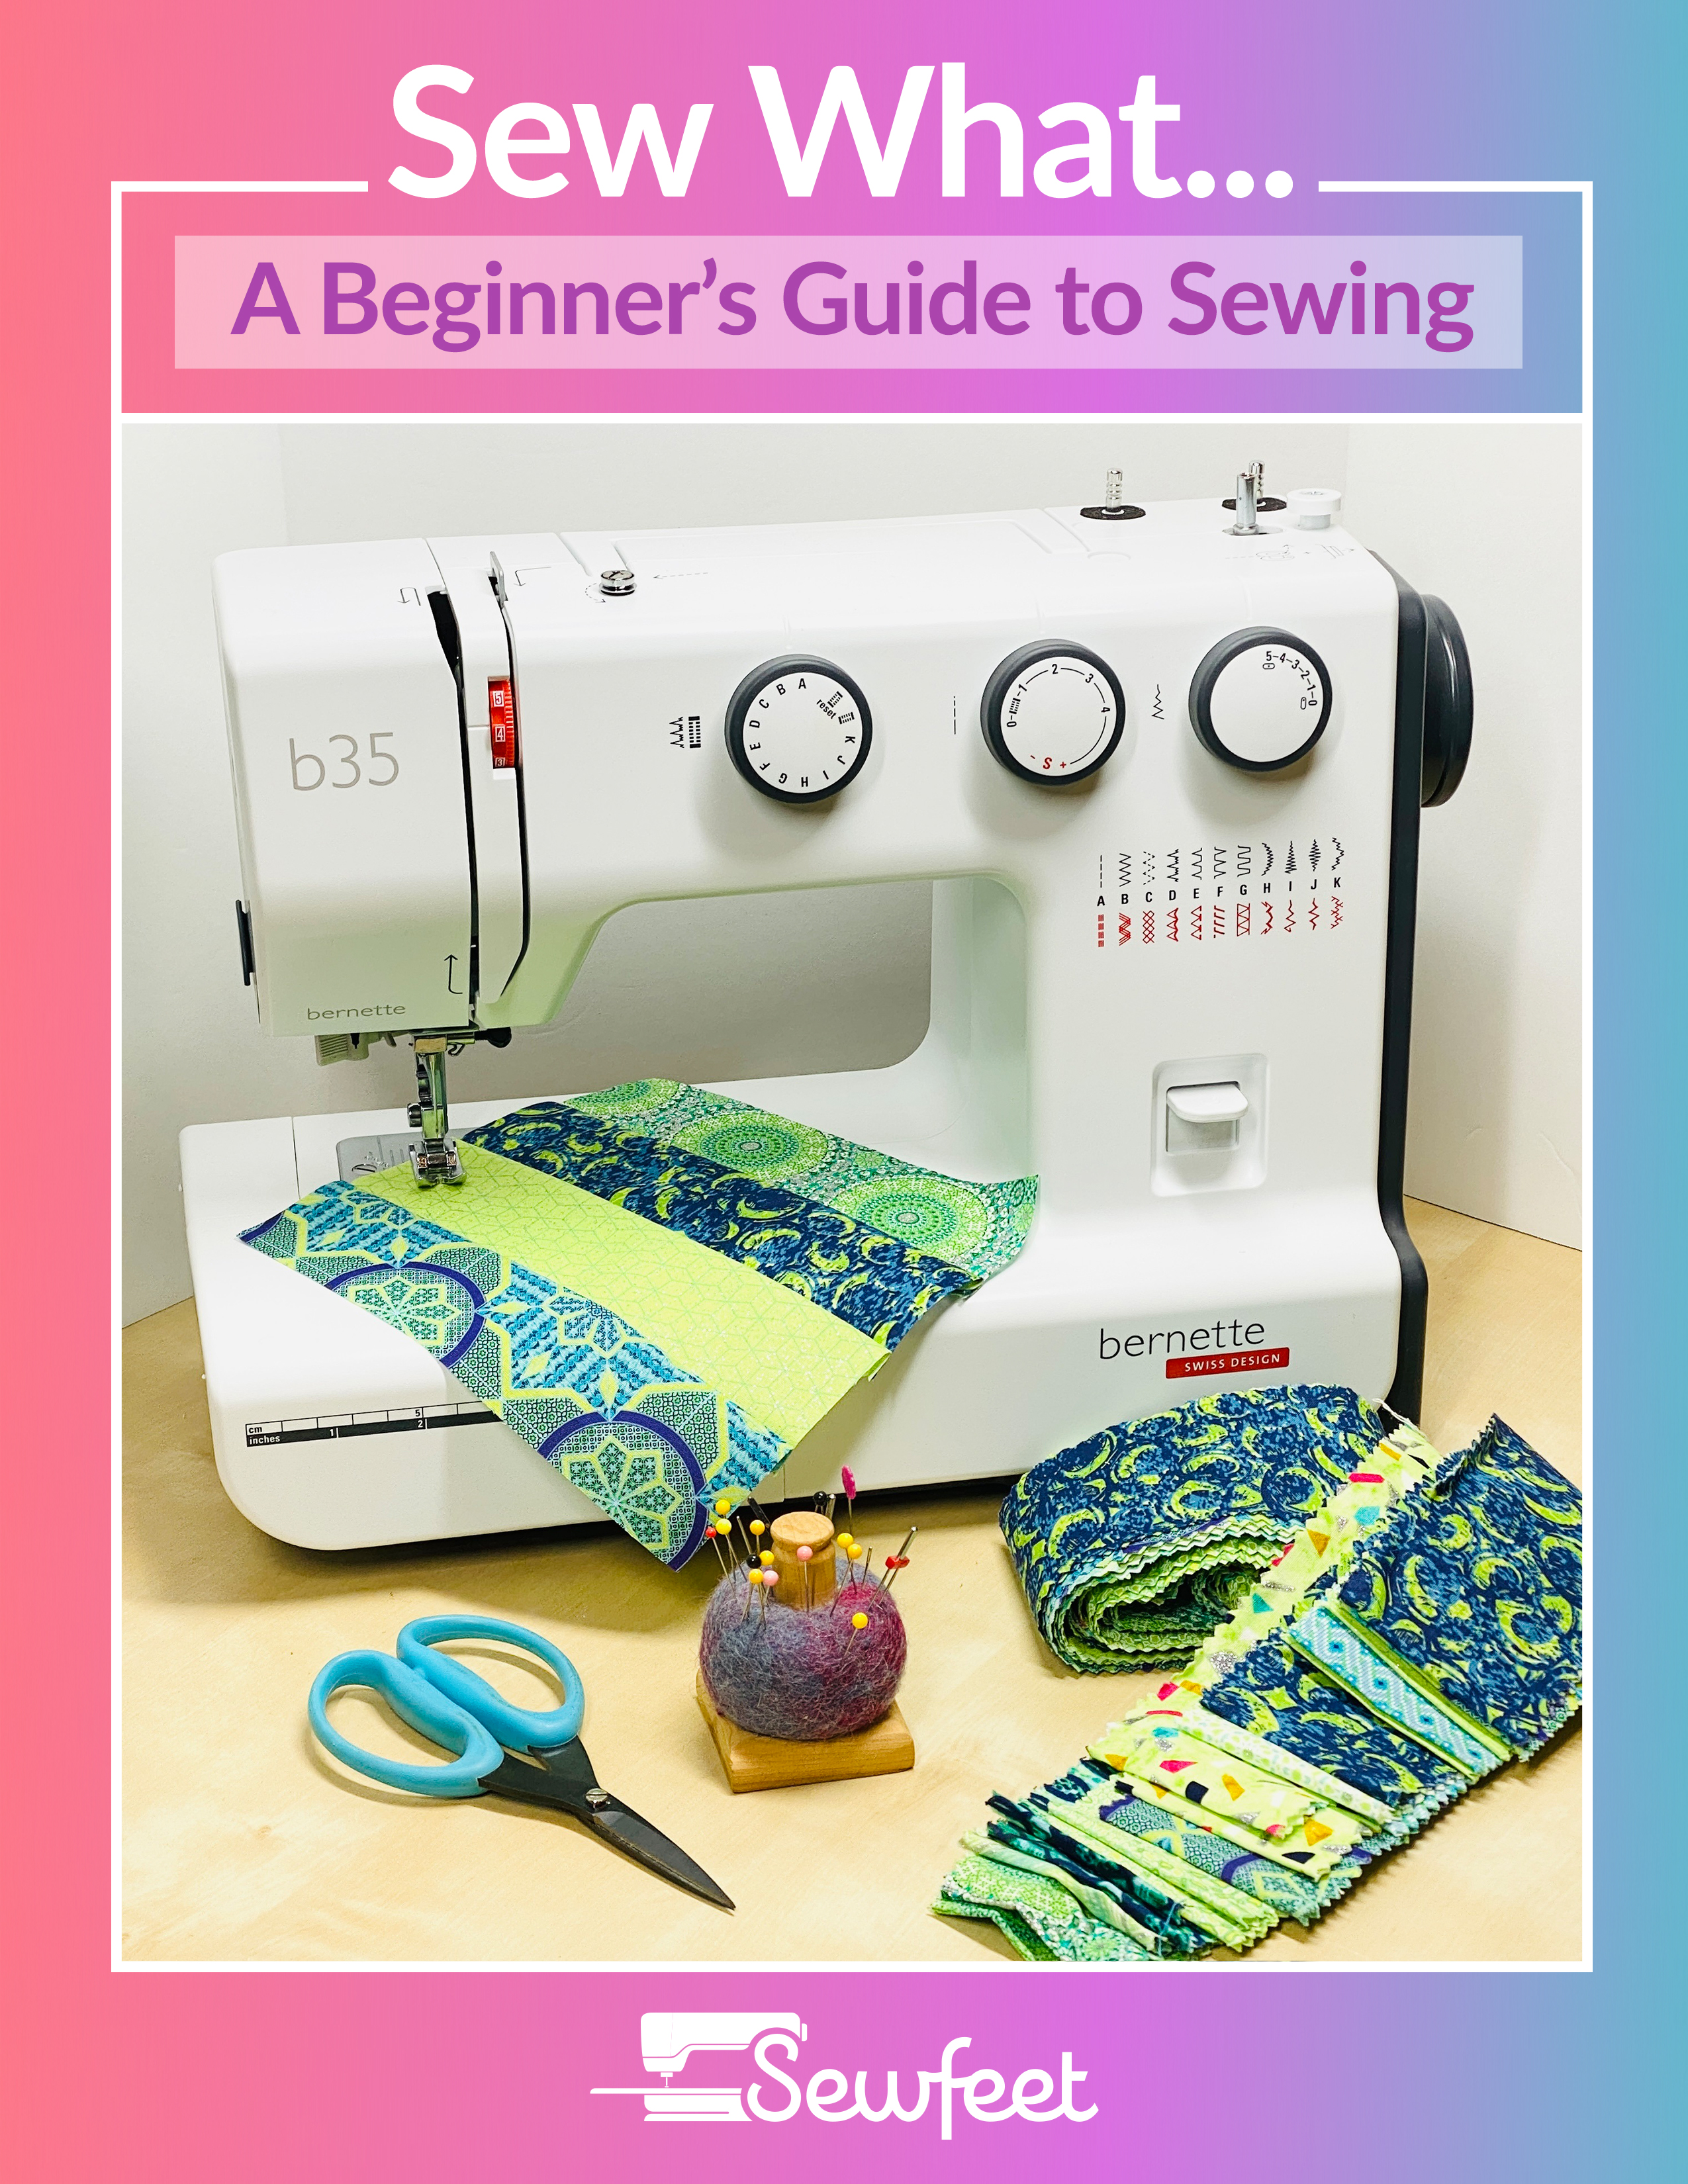 Sew What…A Beginner’s Guide to Sewing